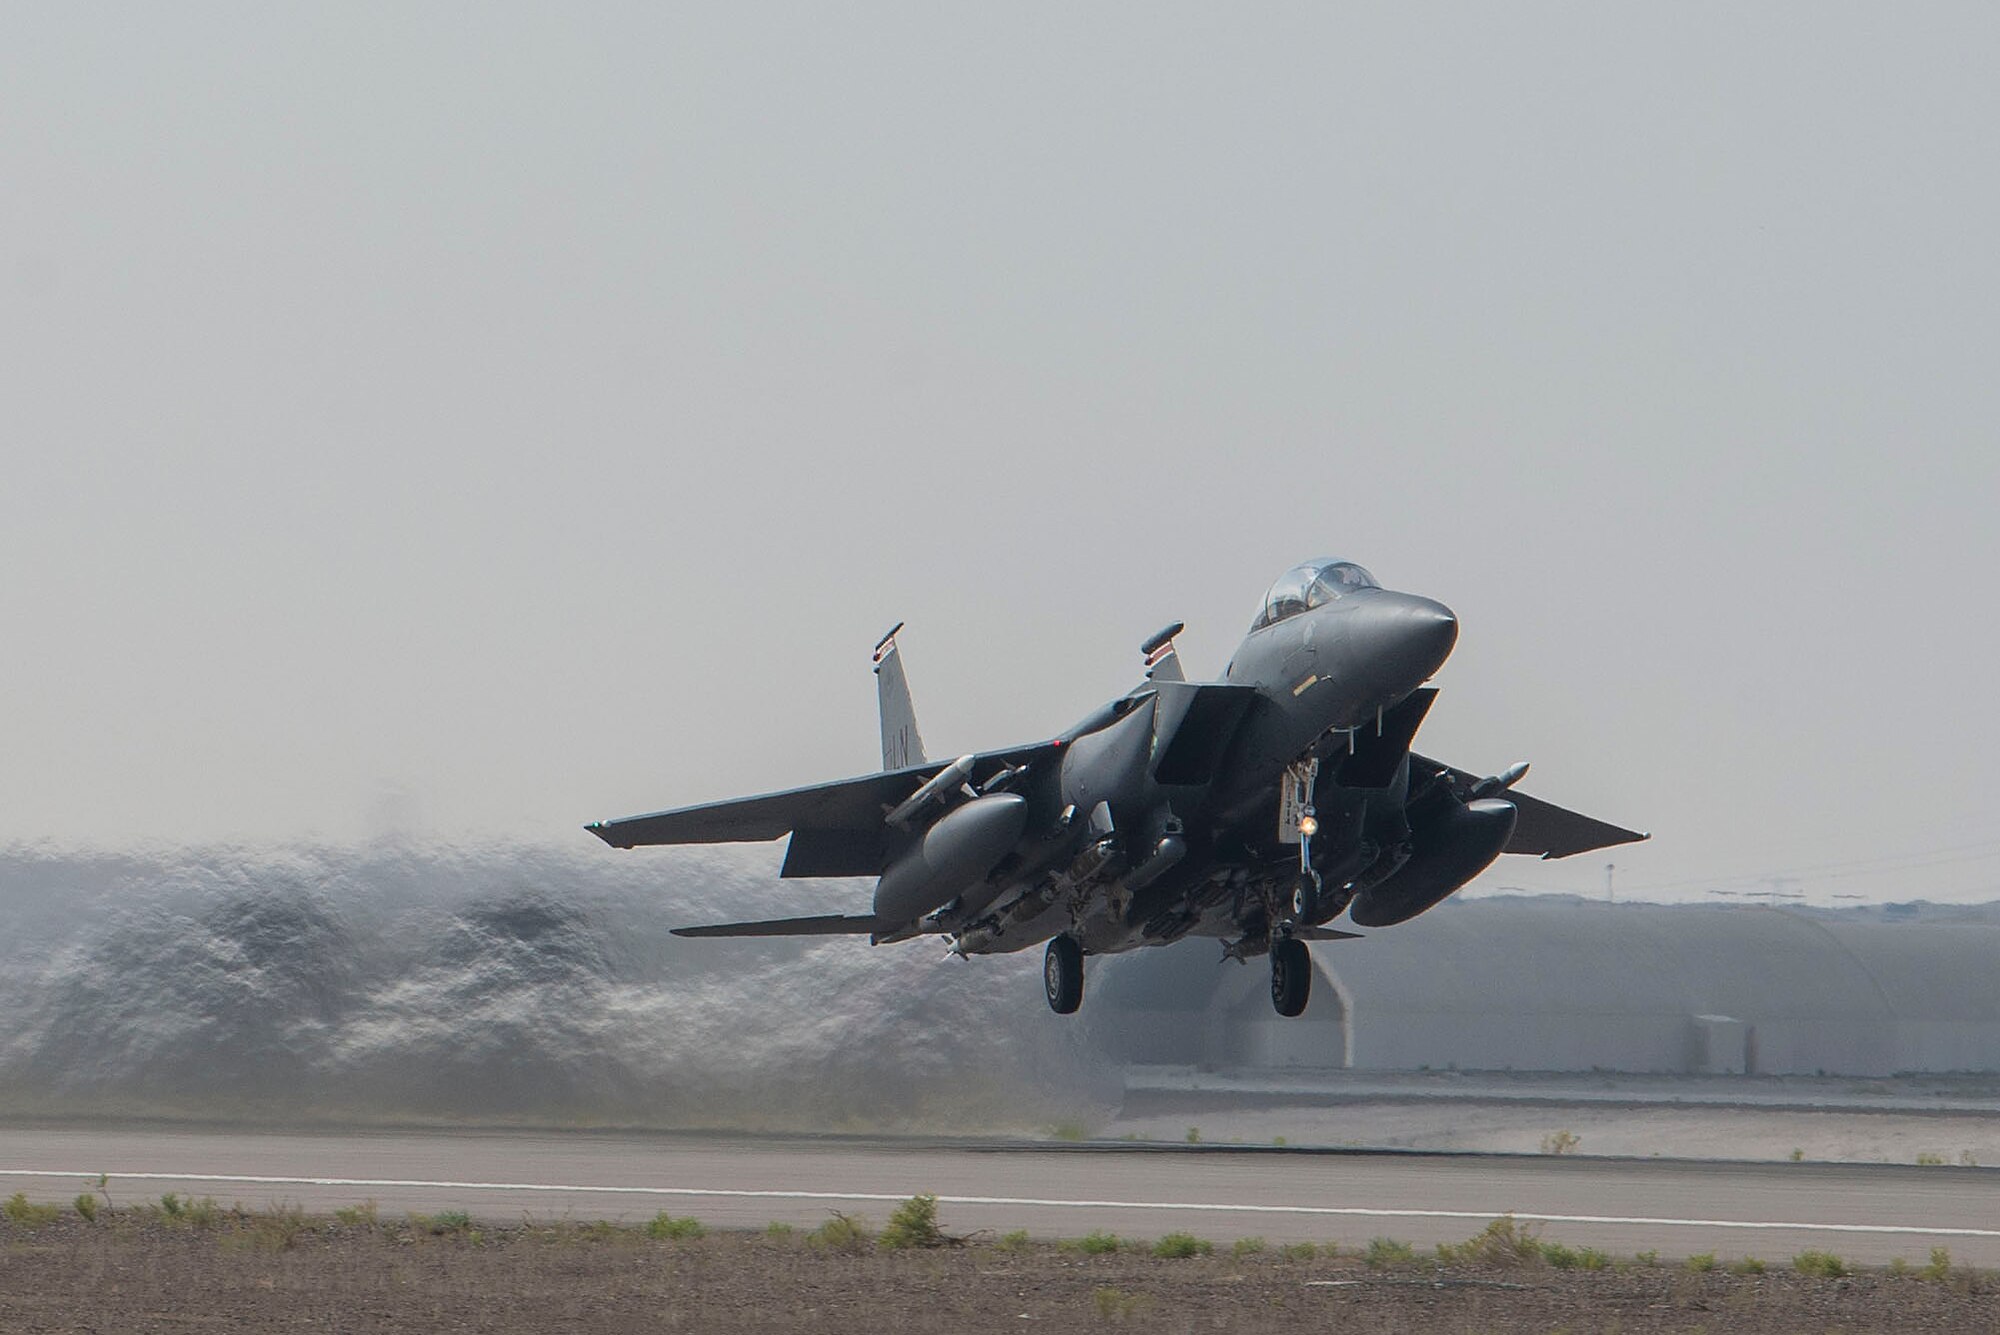 A U.S. Air Force F-15E Strike Eagle piloted by a member of the 494th Expeditionary Fighter Squadron takes off from Al Dhafra Air Base, United Arab Emirates, in support of regional security operations, April 30, 2021.